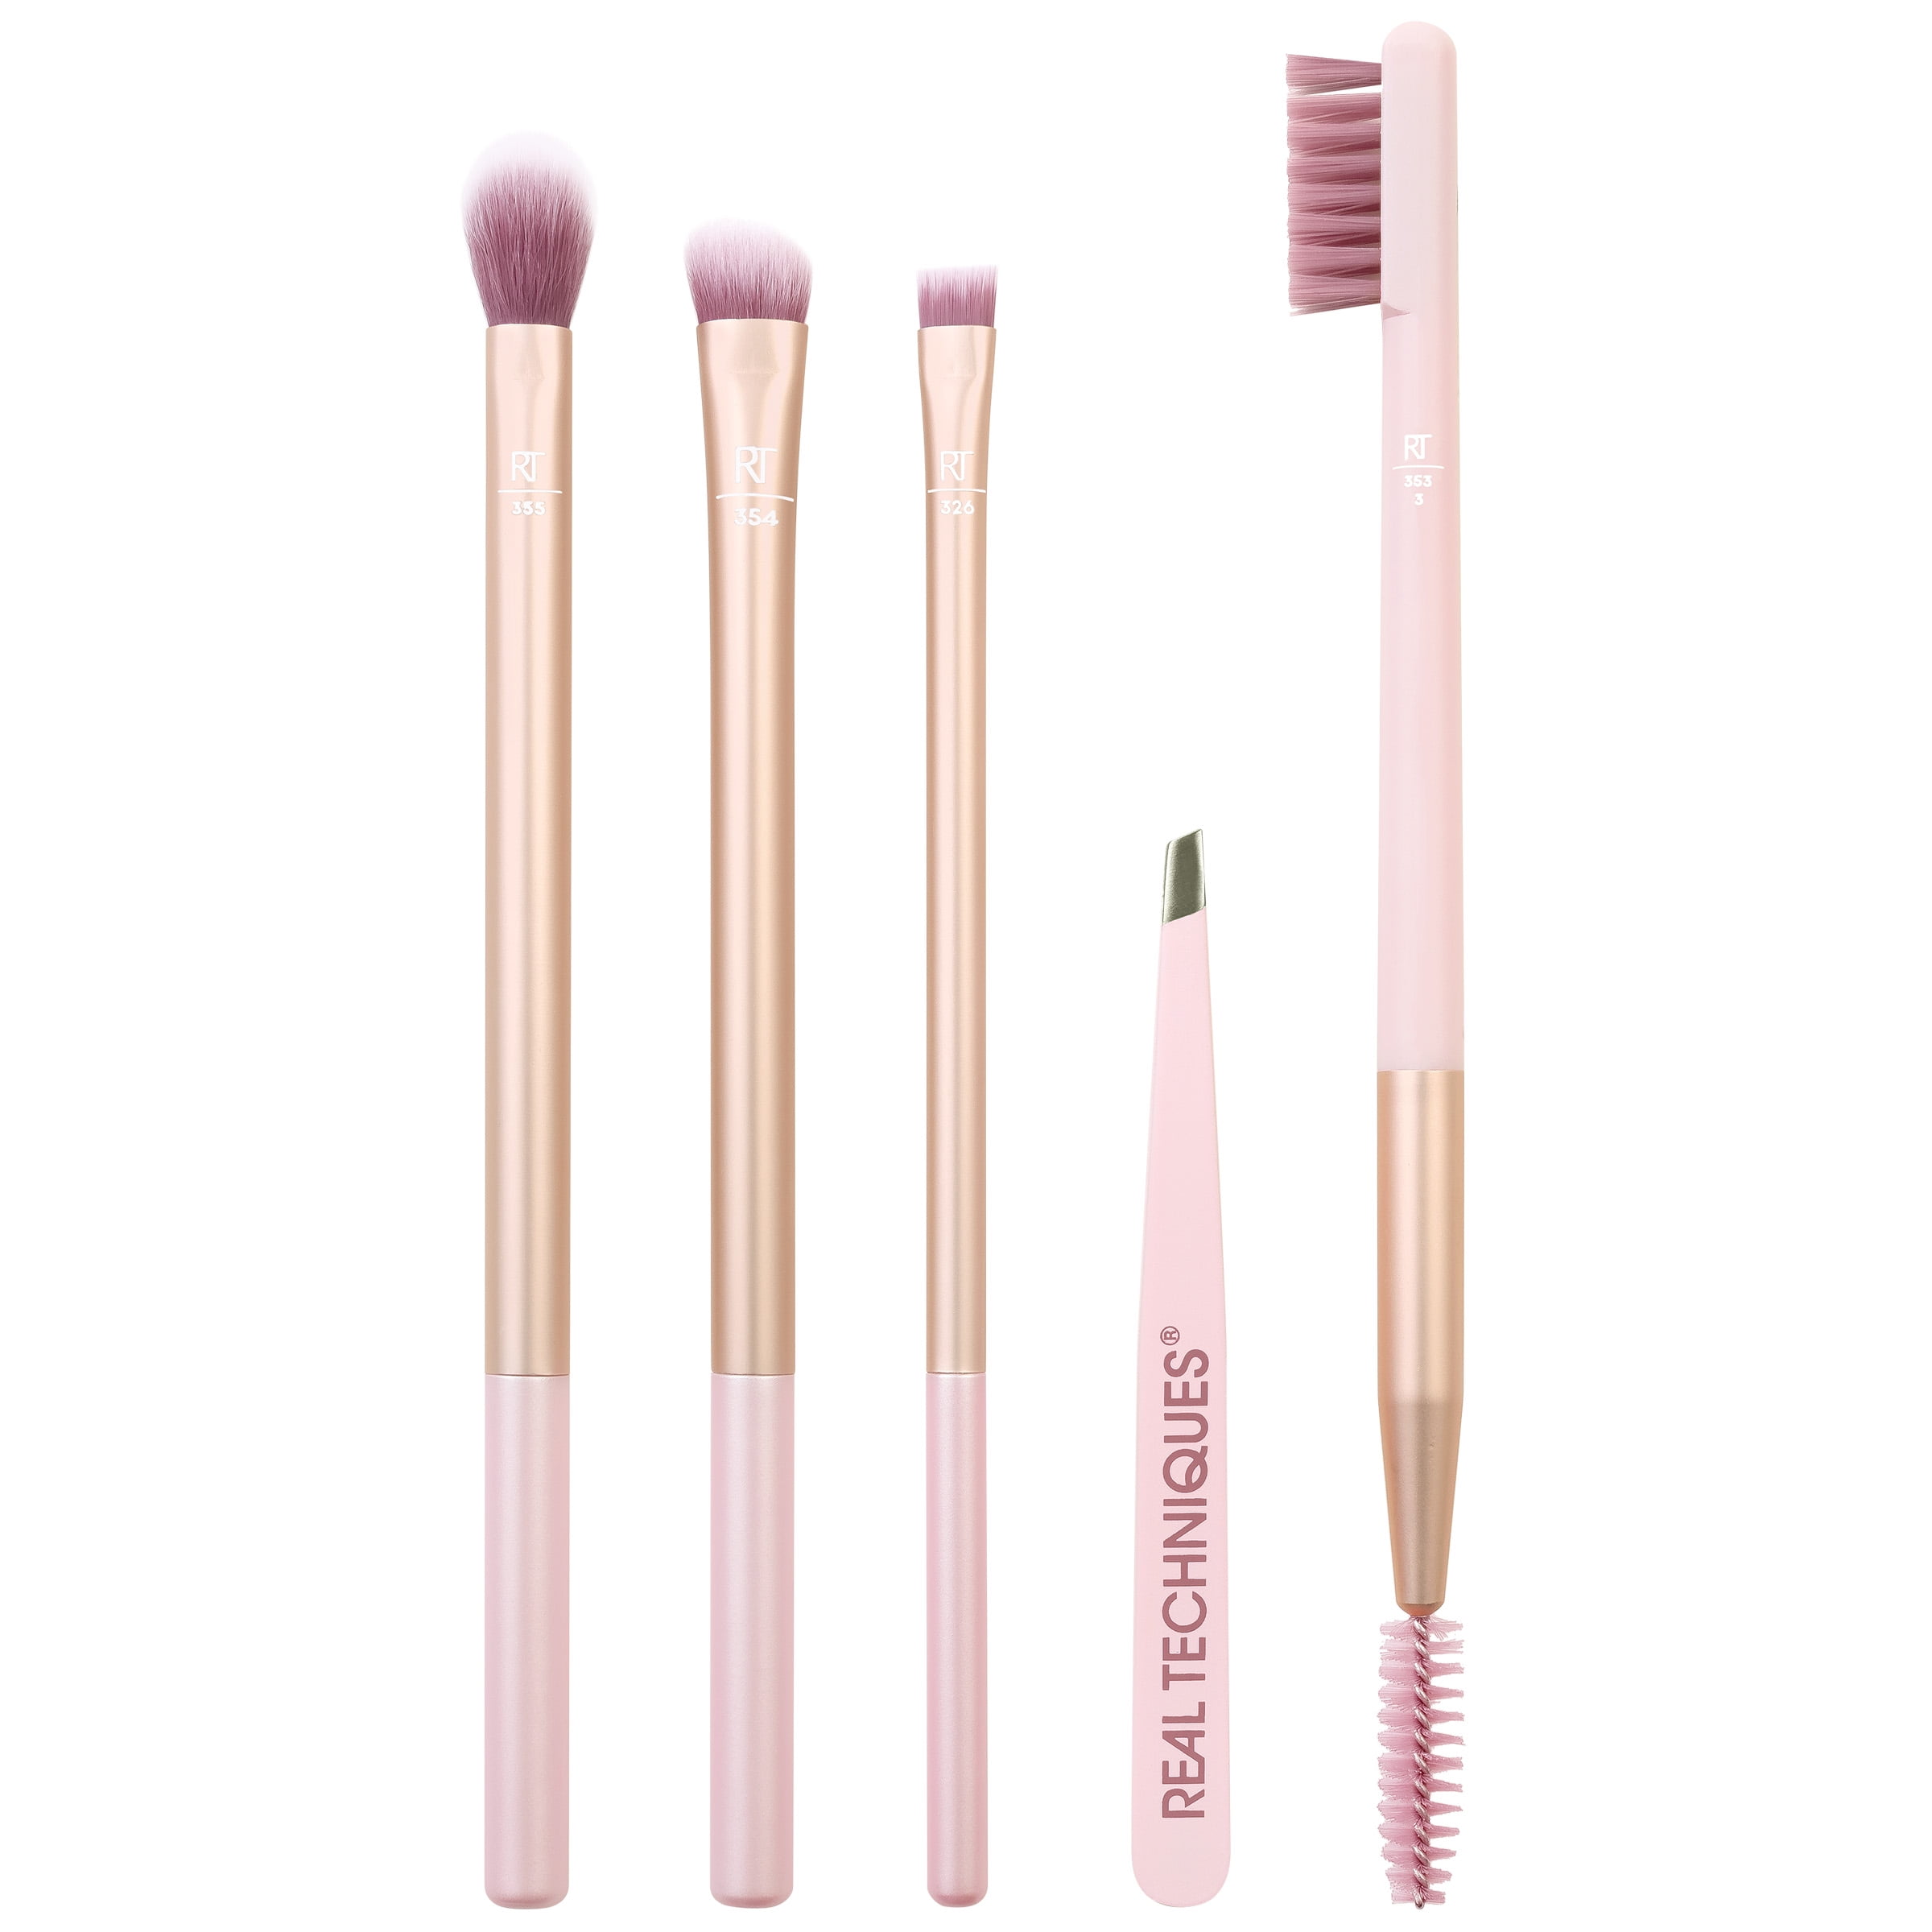 Real Techniques Travel Essentials Makeup Brush Kit, Makeup Brushes, Perfect  For On The Go, Multicolored, Vegan Synthetic Makeup Brush Bristles, 4